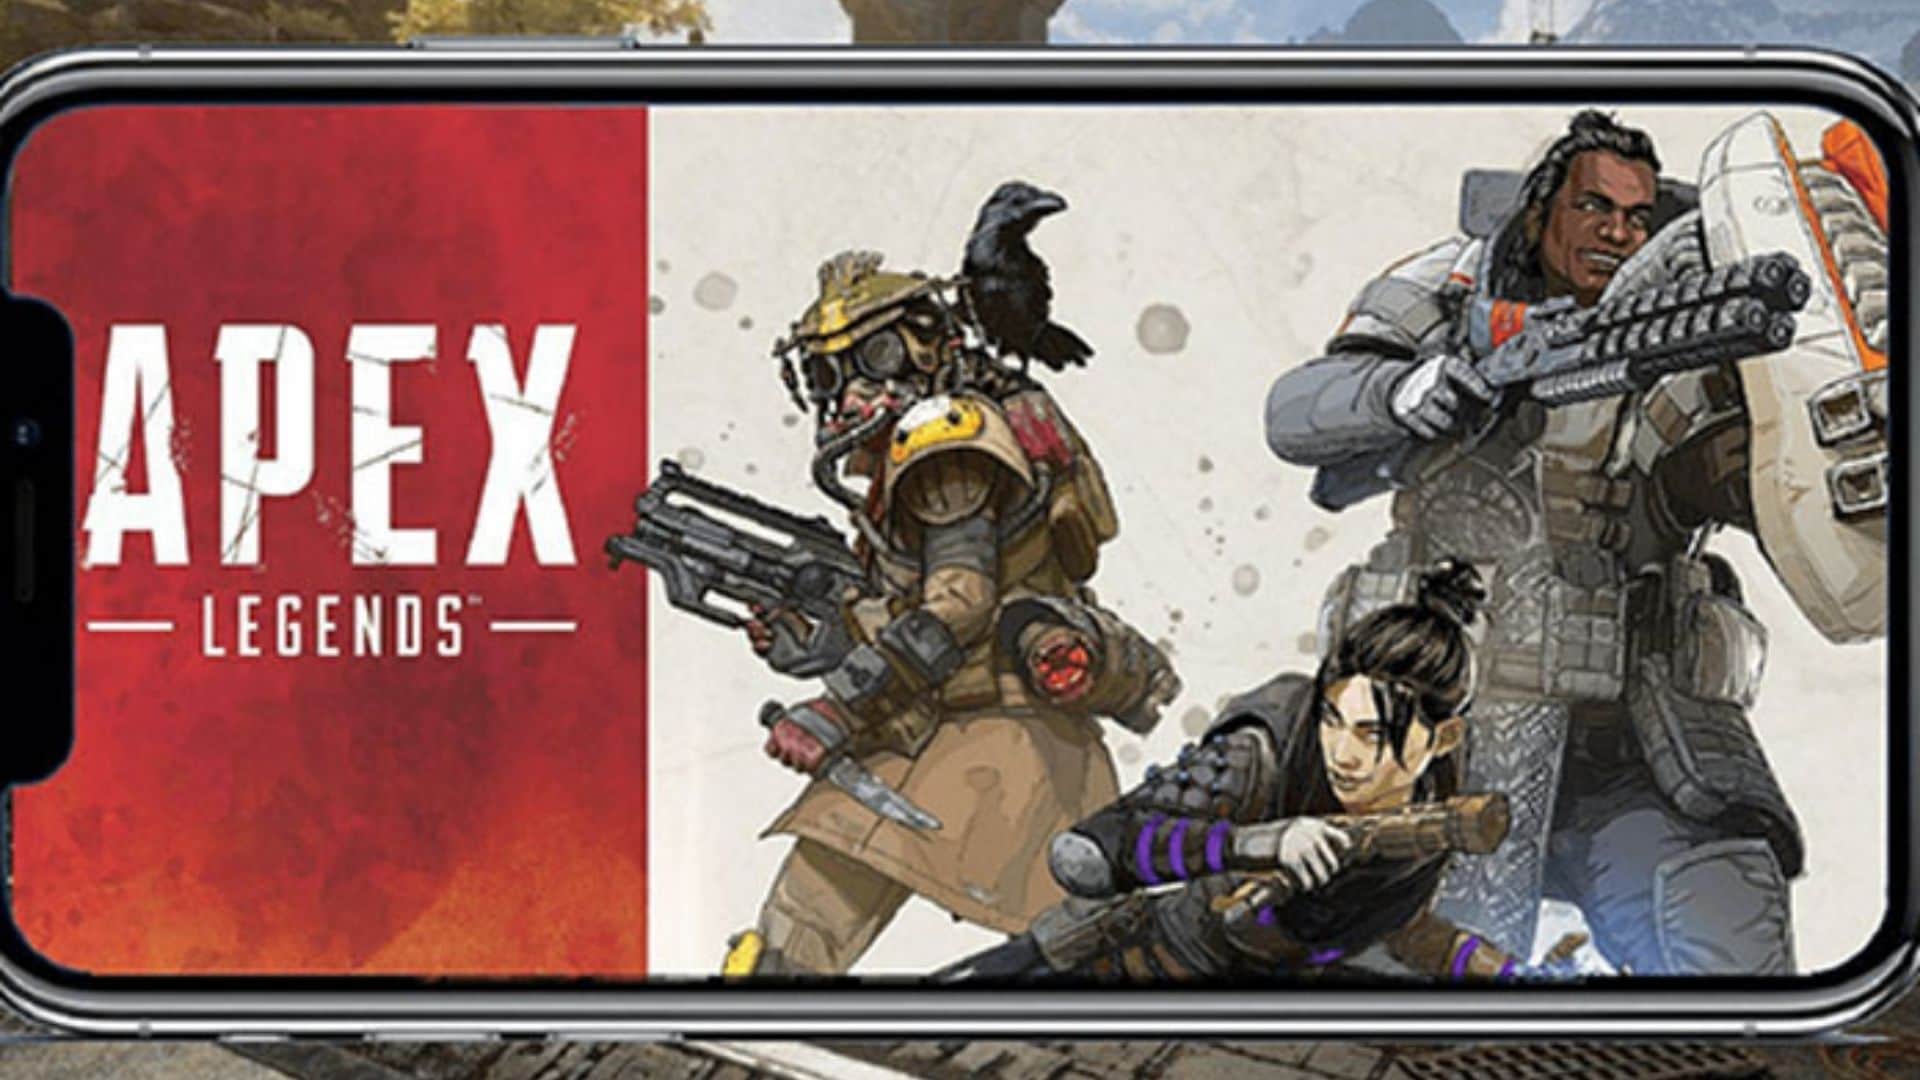 Apex Legends Mobile: After a long while, there has been a game that will be opened for beta testing in India along with the Philippines.